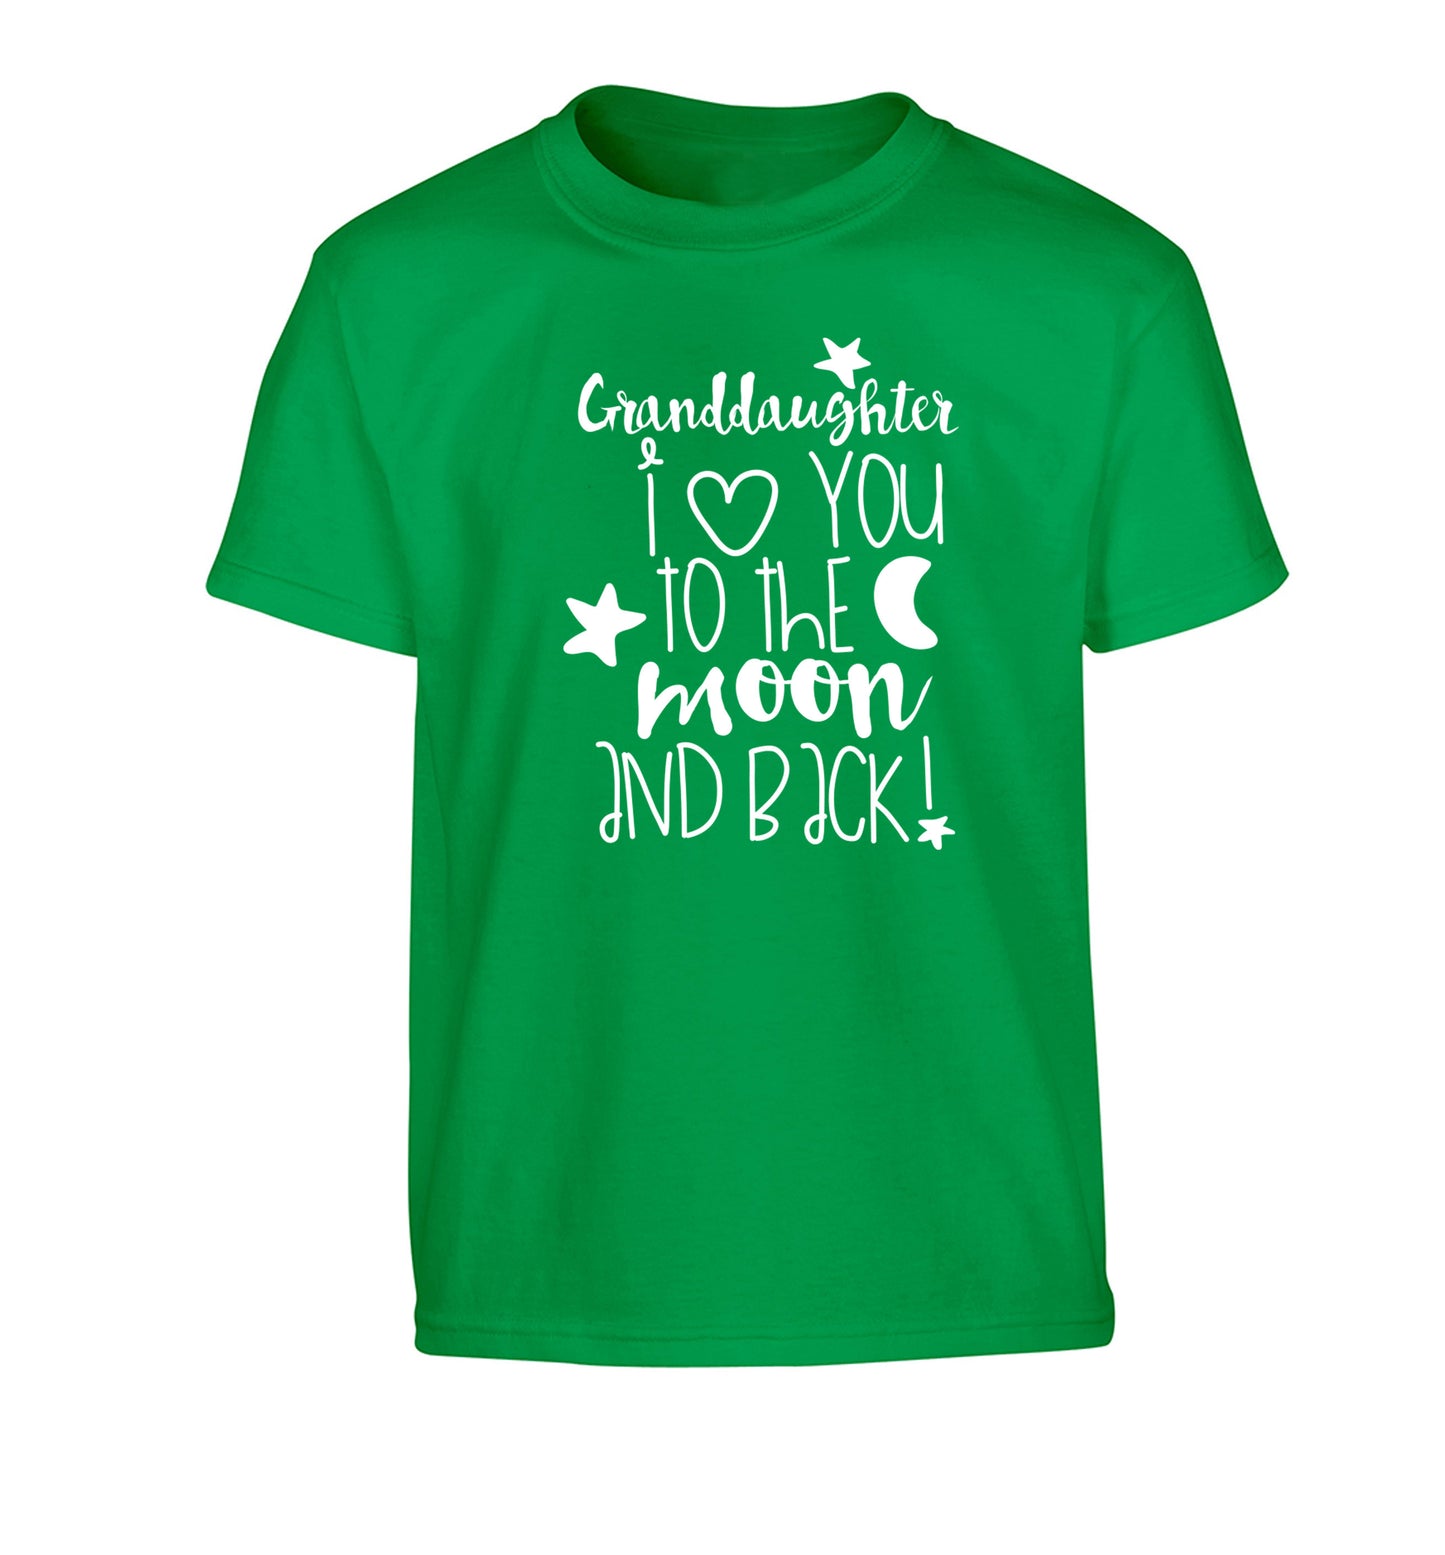 Granddaughter I love you to the moon and back Children's green Tshirt 12-14 Years